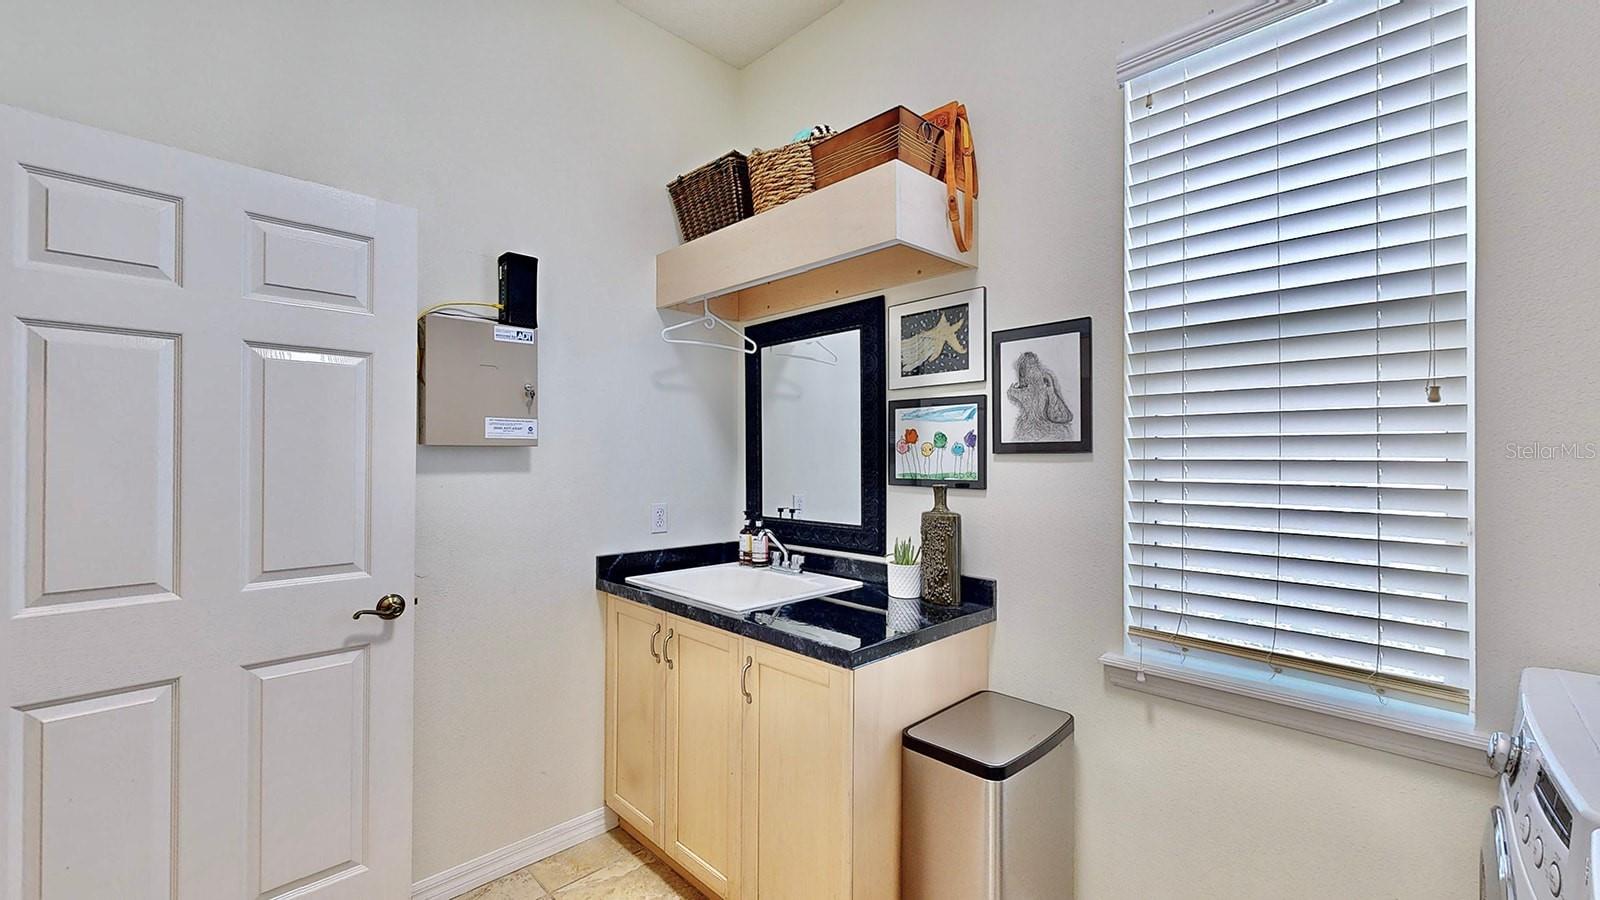 Laundry Room Sink, Hanging Area & Storage